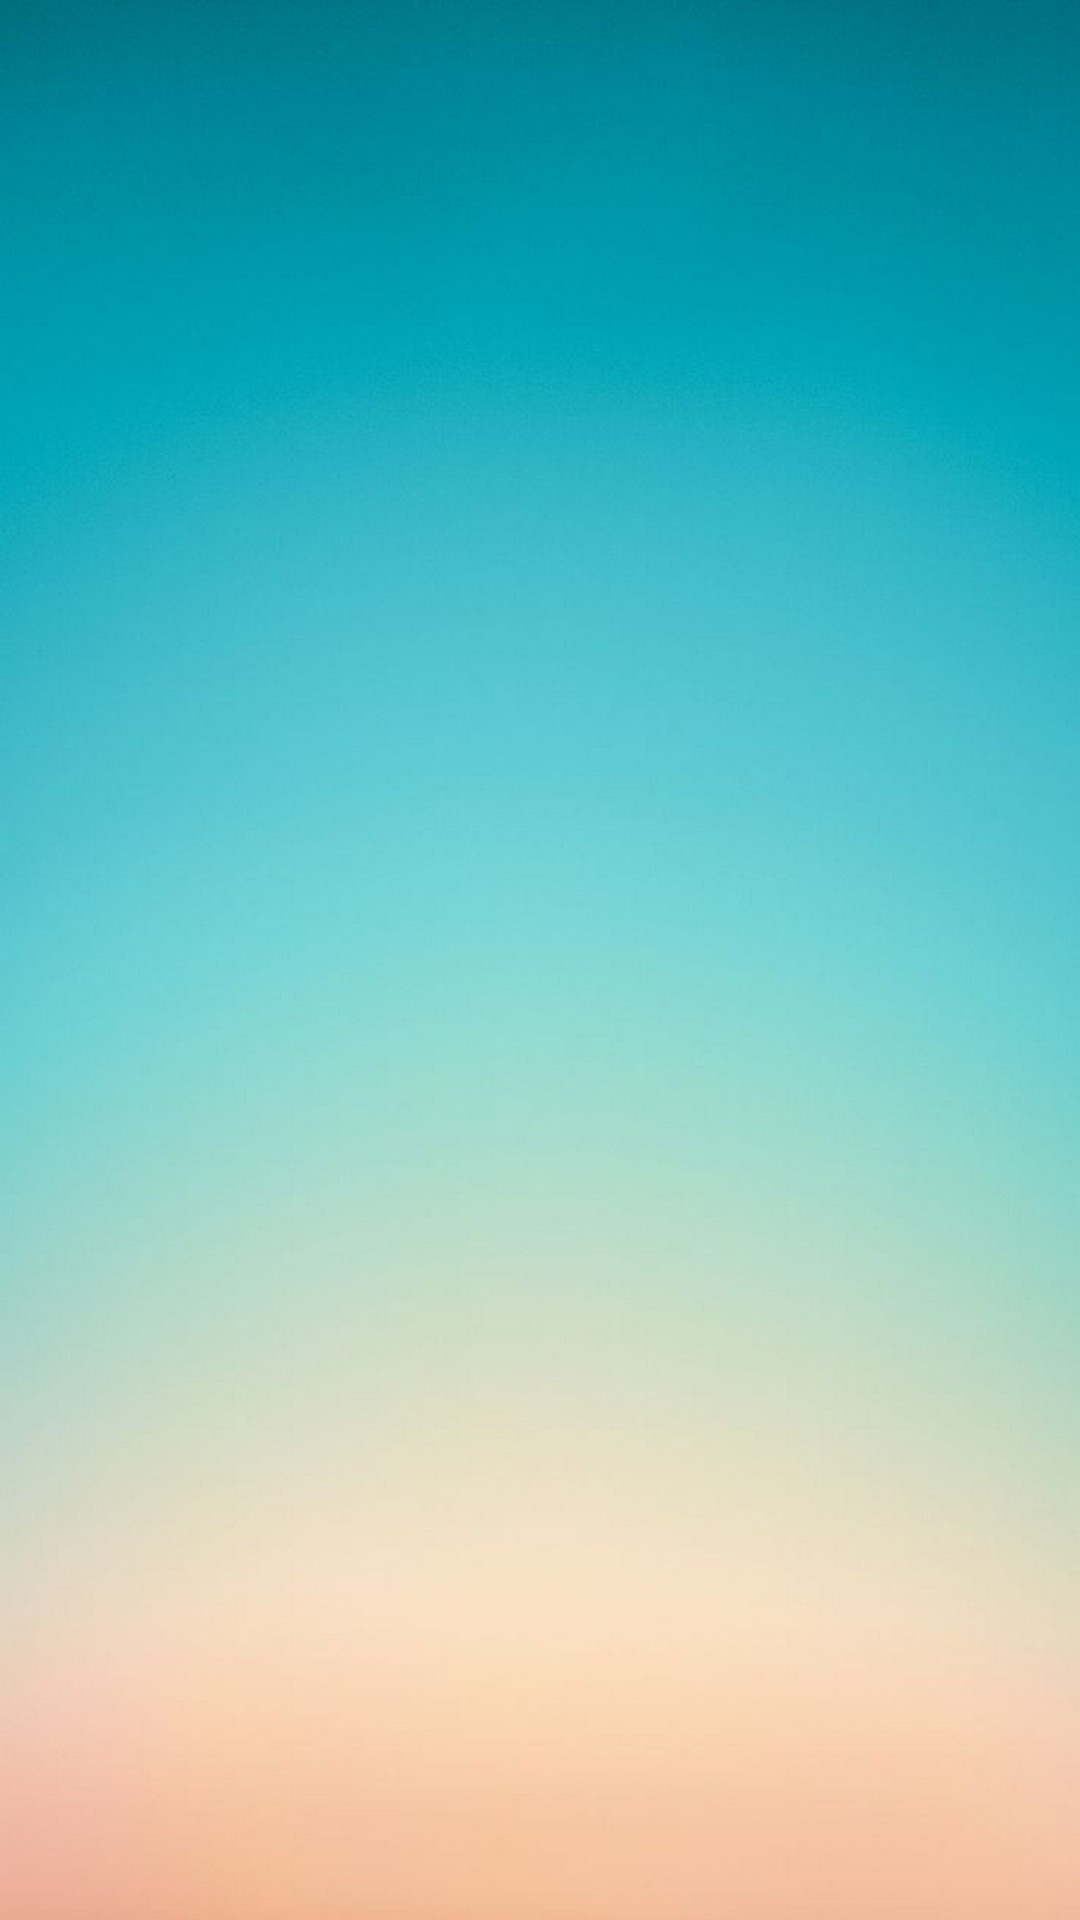 Gradient iPhone 7 Wallpaper with high-resolution 1080x1920 pixel. You can use this wallpaper for your iPhone 5, 6, 7, 8, X, XS, XR backgrounds, Mobile Screensaver, or iPad Lock Screen